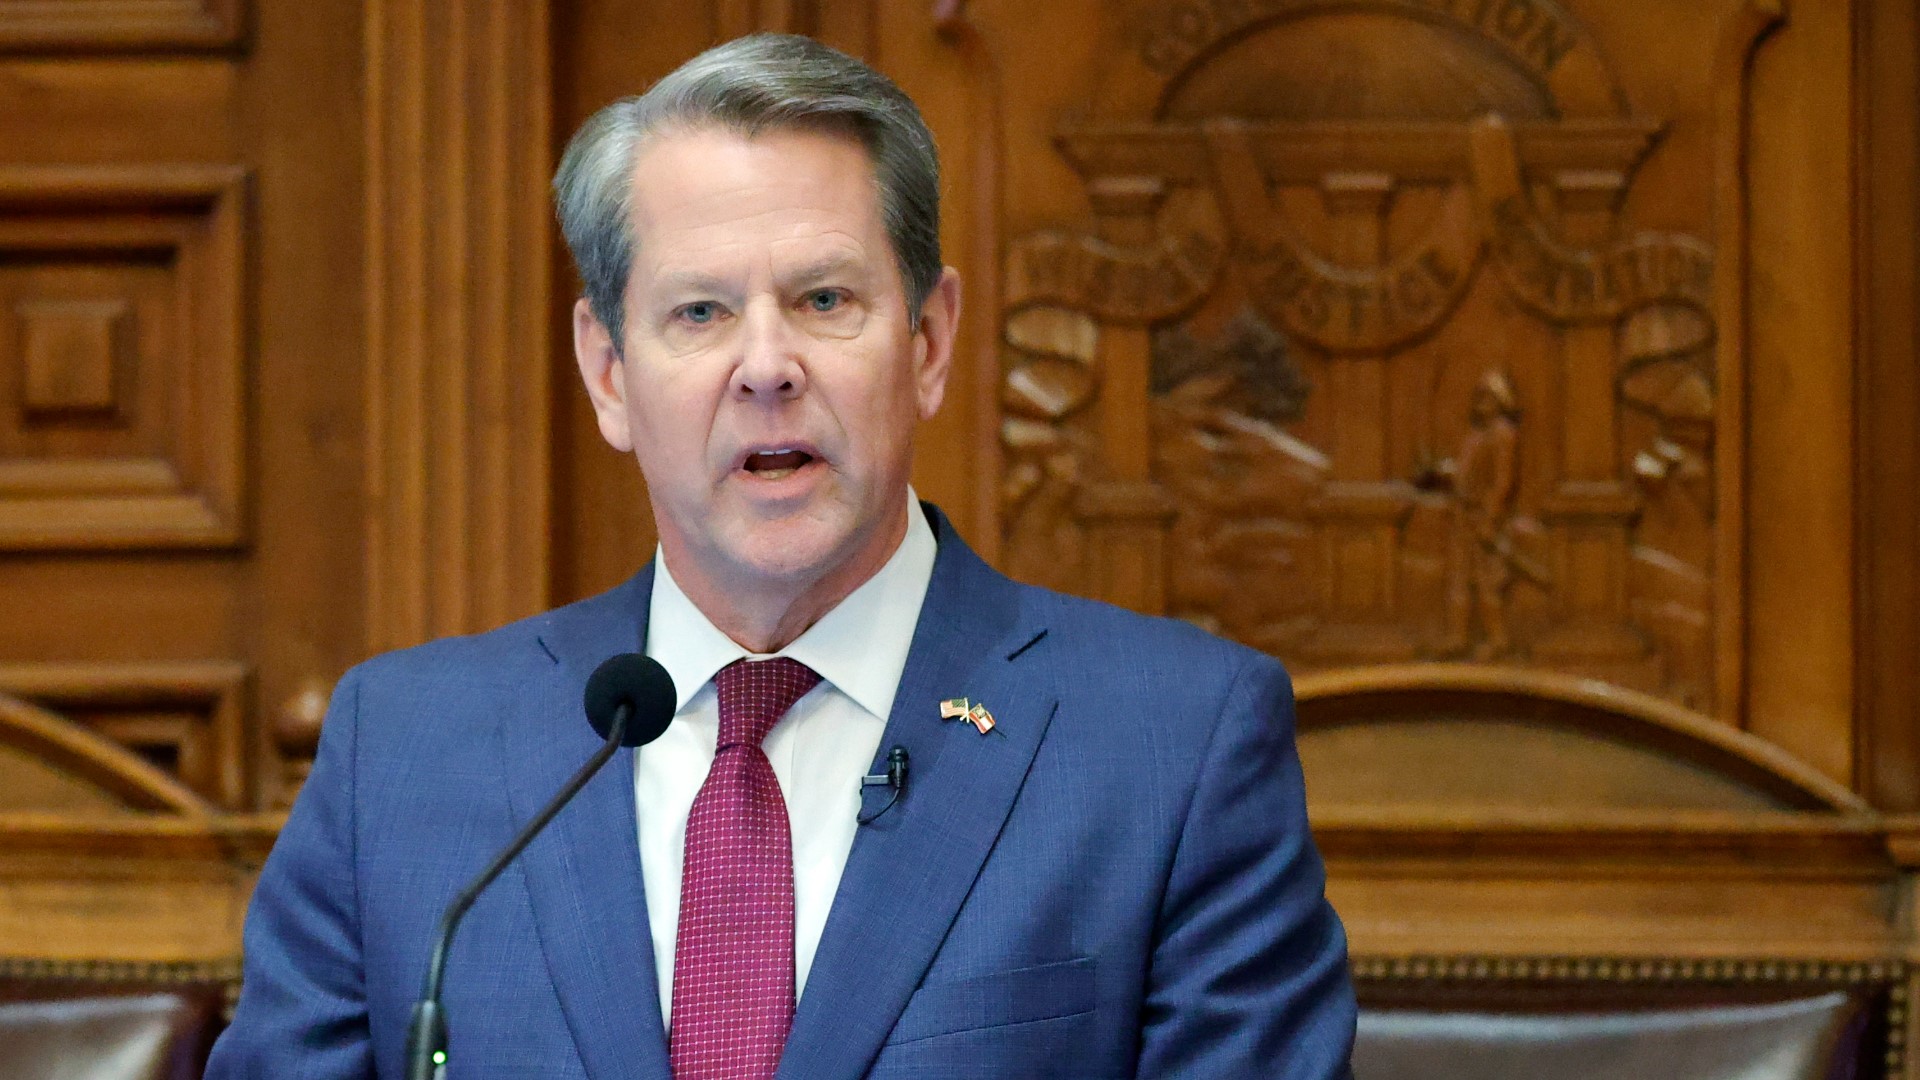 The bill is waiting on Gov. Kemp's signature.